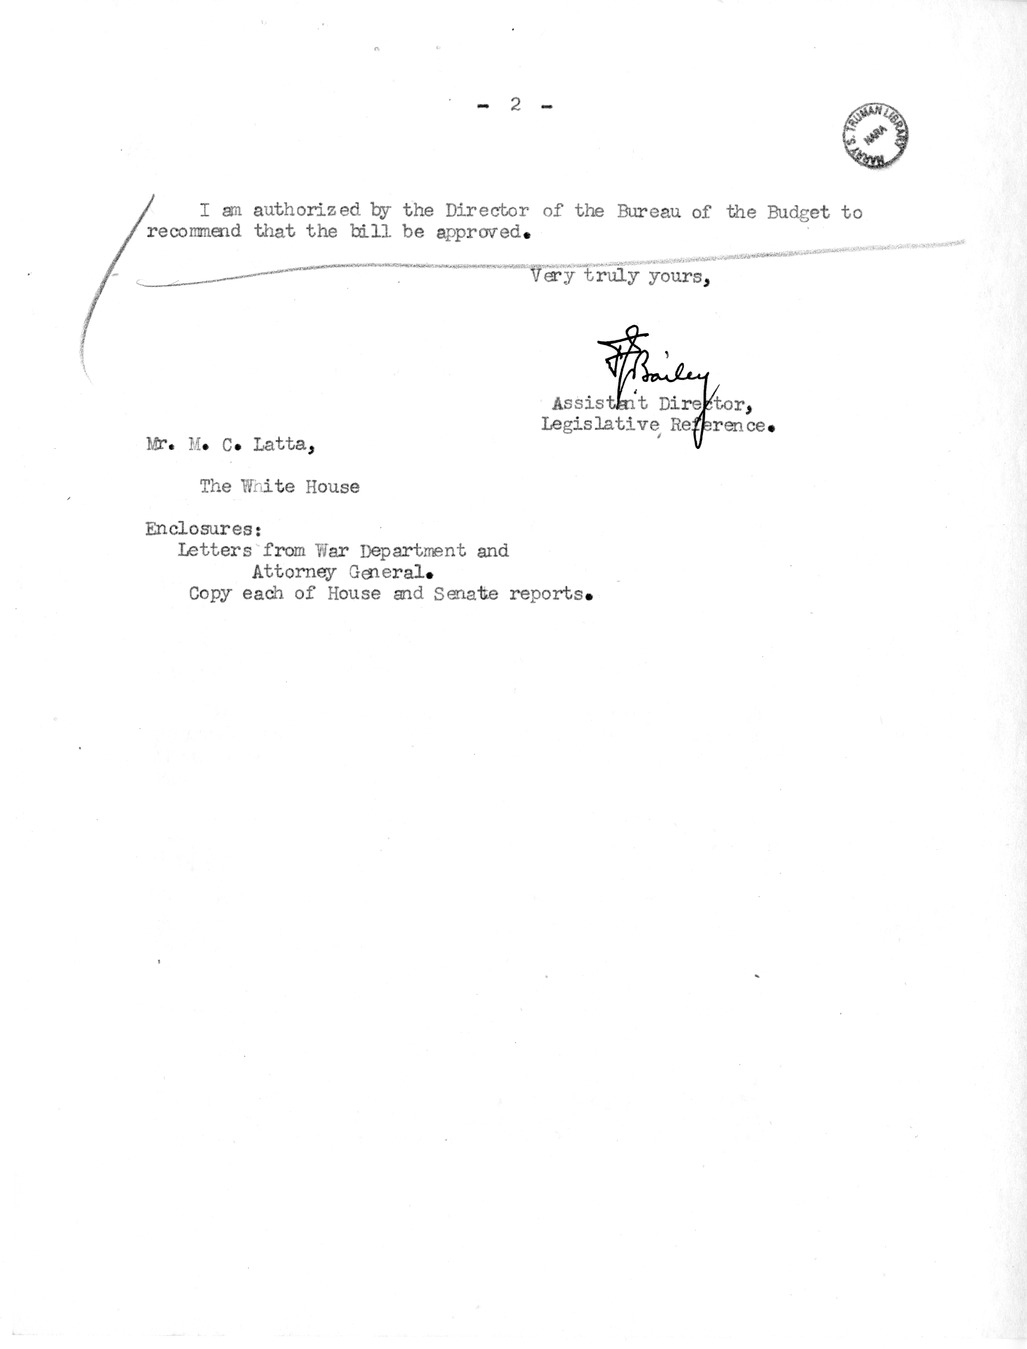 Memorandum from Frederick J. Bailey to M. C. Latta, S. 1184, For the Relief of A. L. Clem and Ida M. Bryant, with Attachments